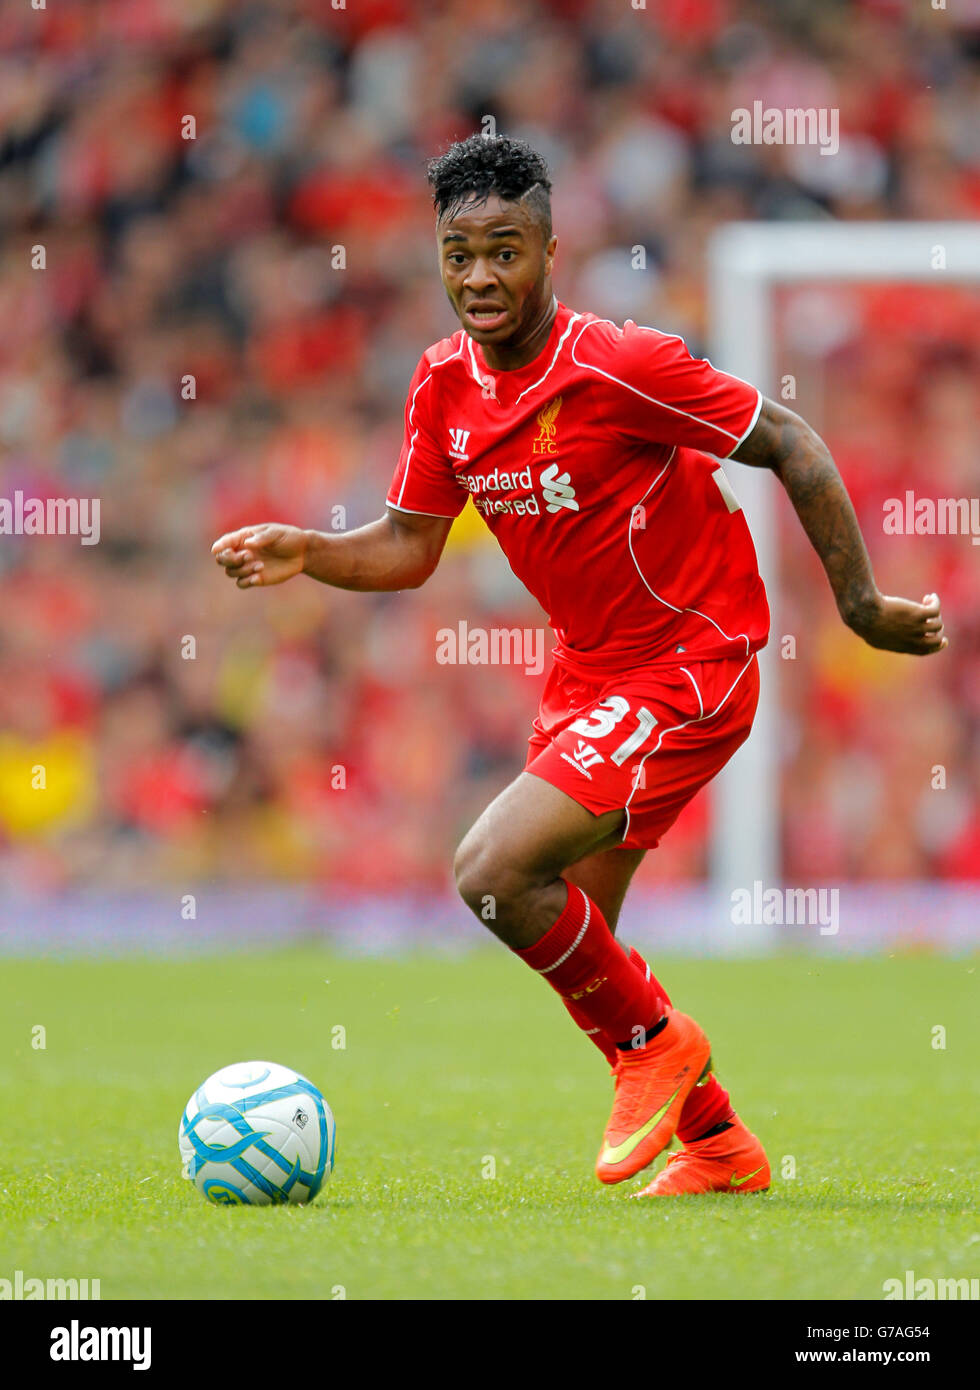 Soccer - Pre Season Friendly - Liverpool v Dortmund. Liverpool's Raheem Sterling in action during the Pre-Season friendly match at Anfield Stadium, Liverpool. Stock Photo